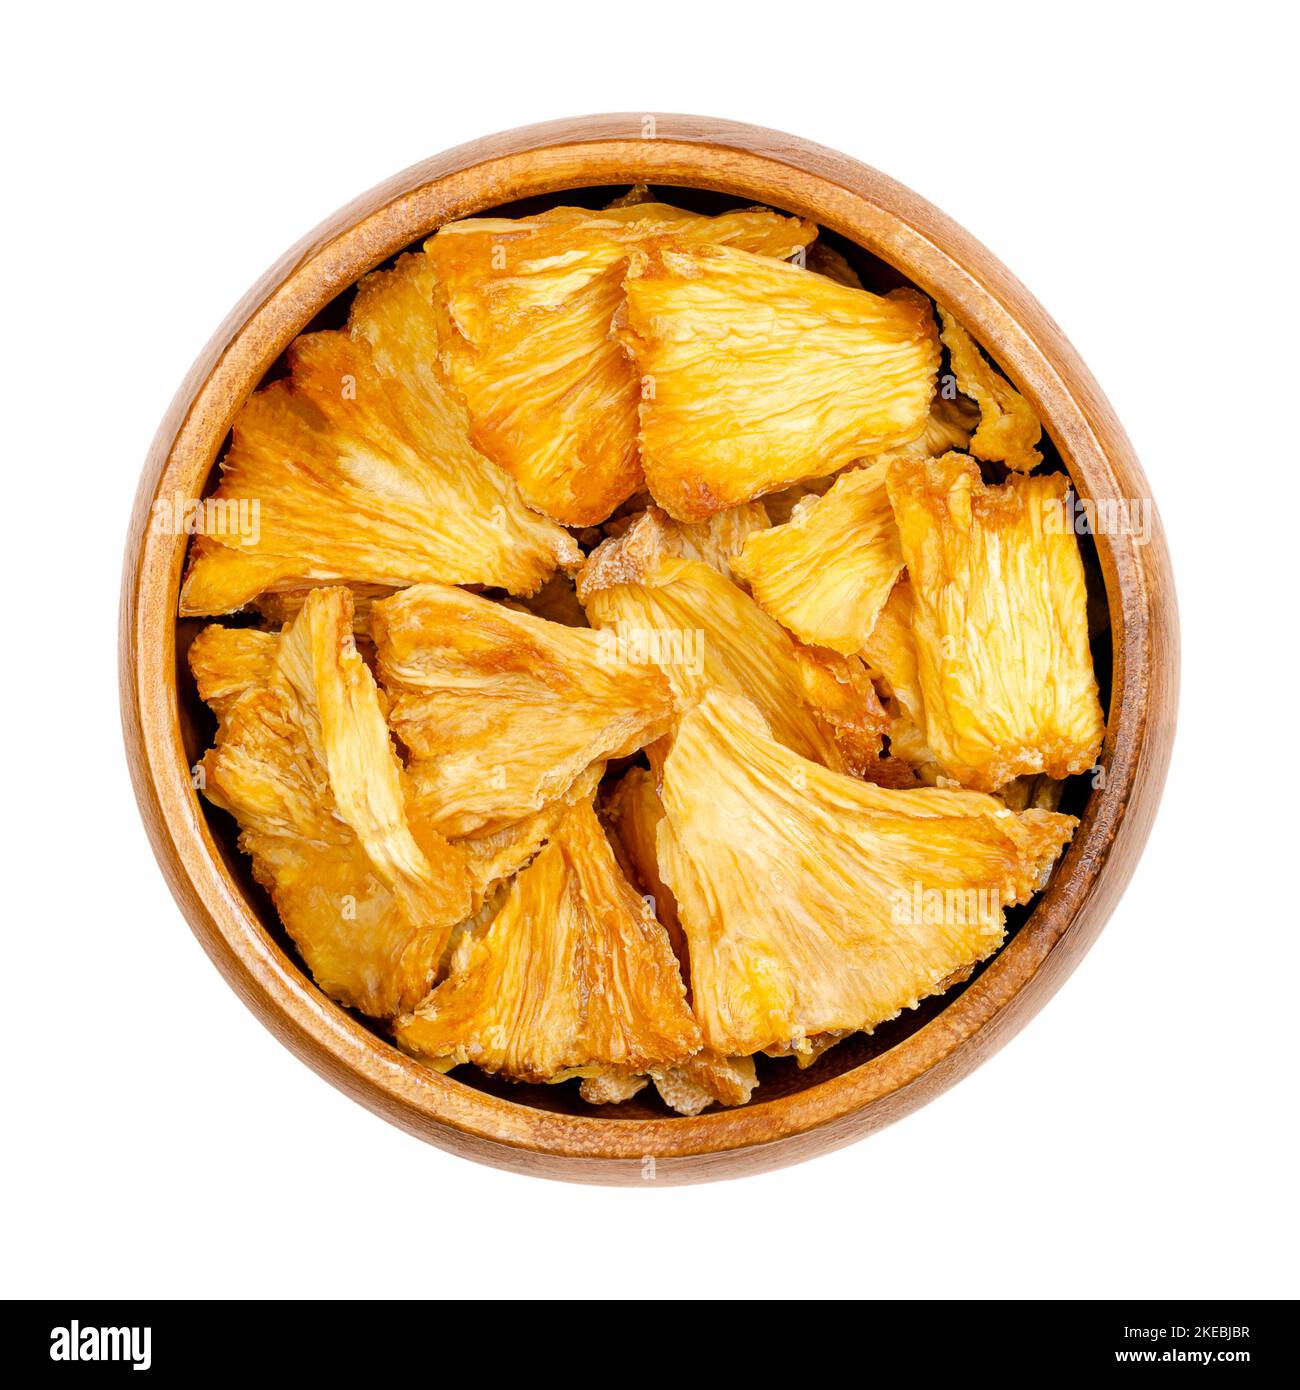 Dehydrated pineapple pieces, in a wooden bowl. Chunks of dried fruits of Ananas comosus, used as snack, for muesli or trail mixes. Stock Photo